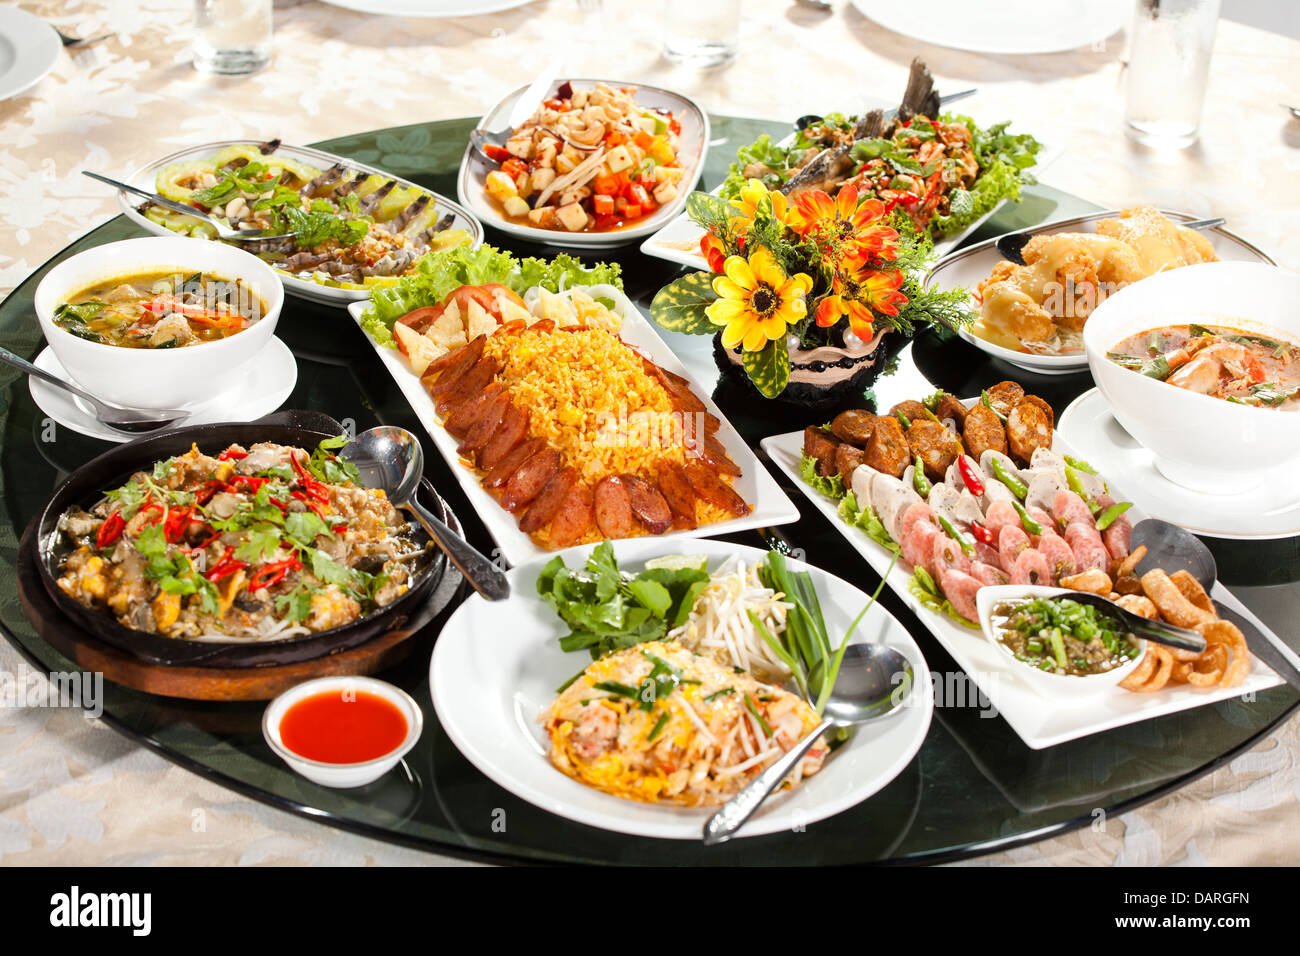 Banquet Table And Food High Resolution Stock Photography and Images - Alamy